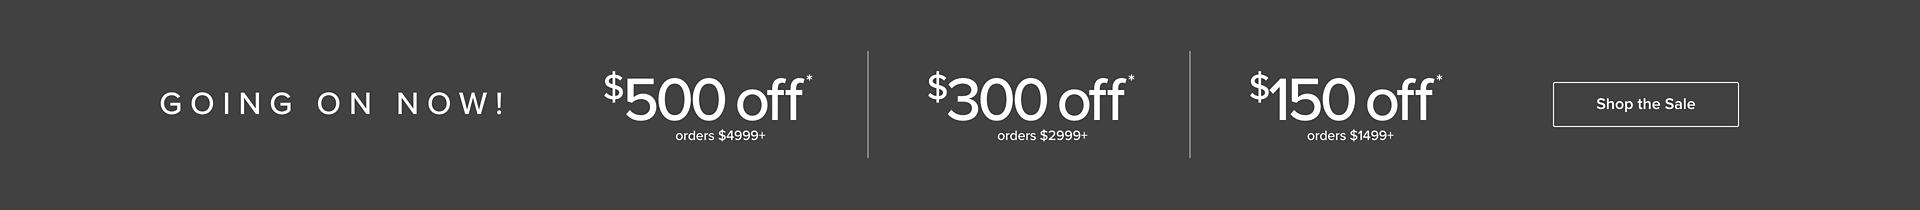 Up to $500 Off orders